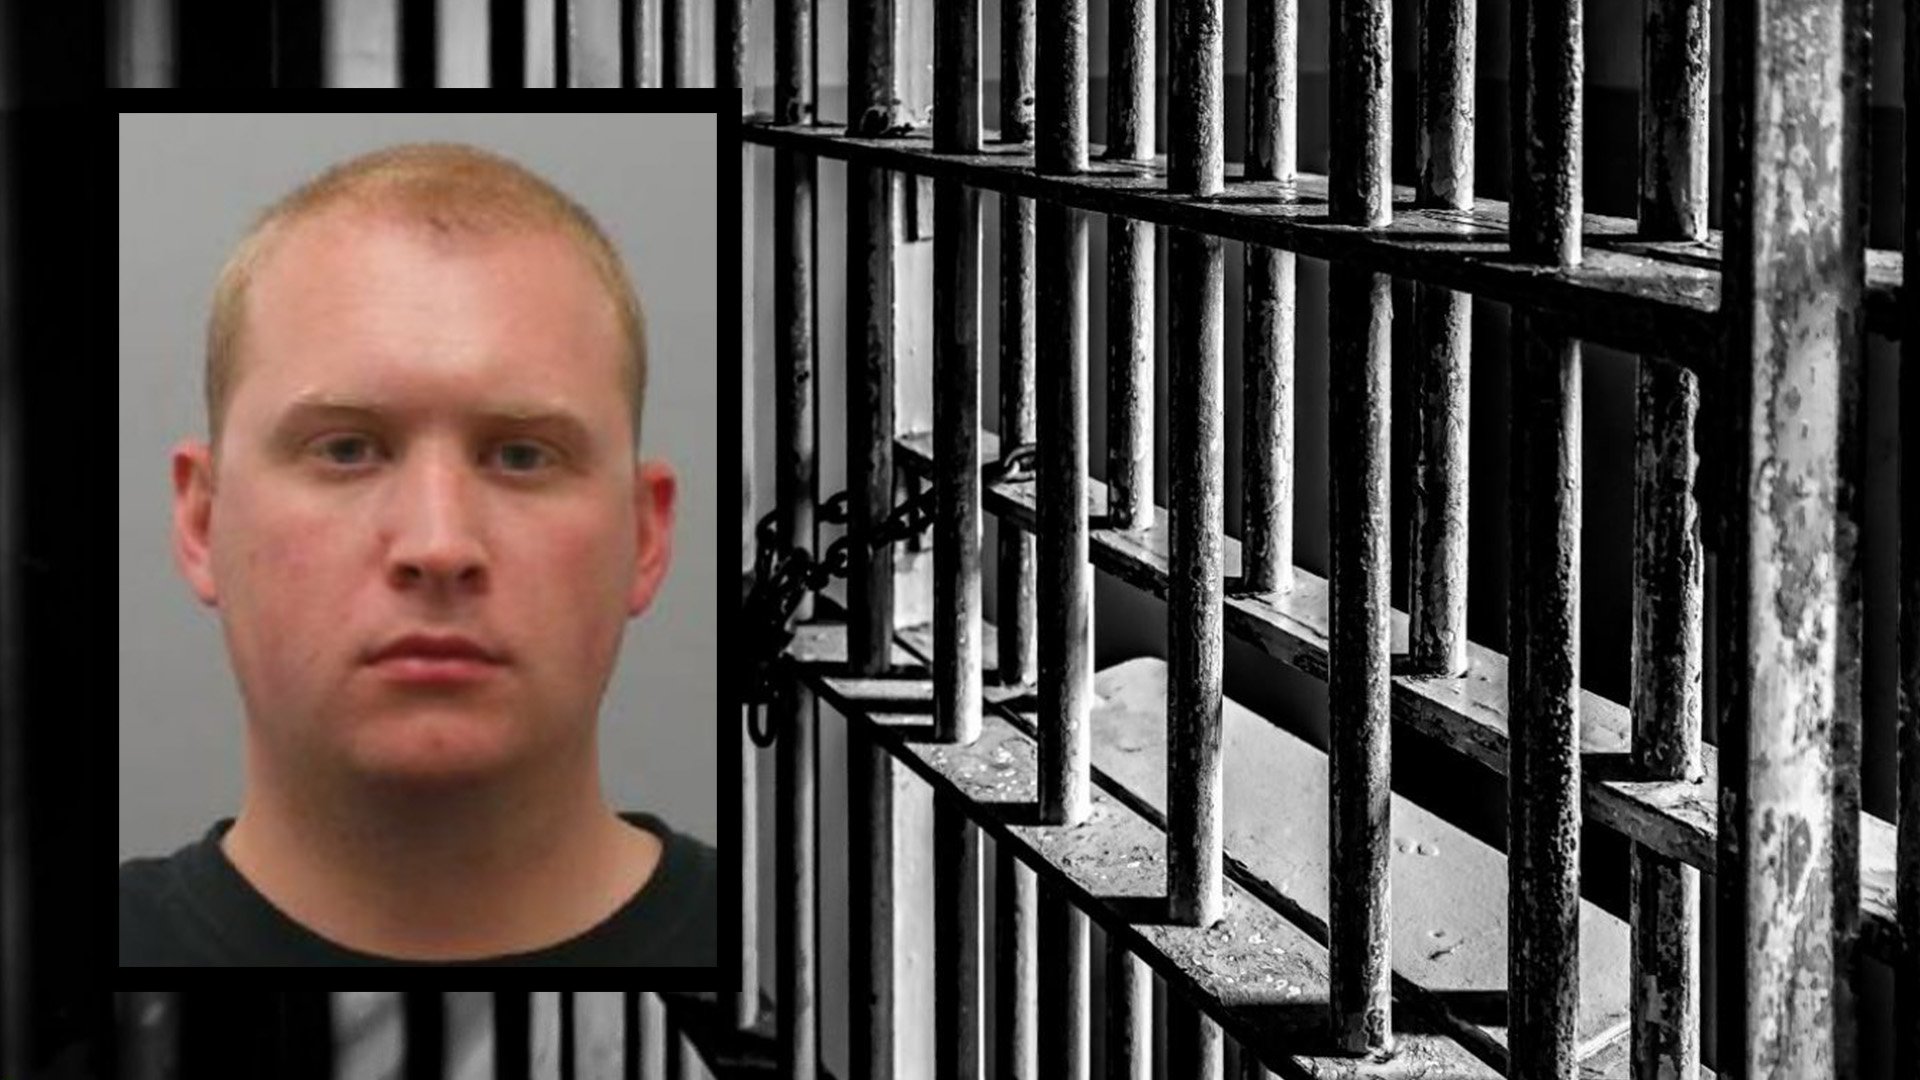 On Aug. 25, 2022, Ex-Maryland Heights Police Officer Nicholas H. Haglof, 30, was sentenced to four years in prison for viewing hundreds of child pornography images. Coffee or Die Magazine composite.